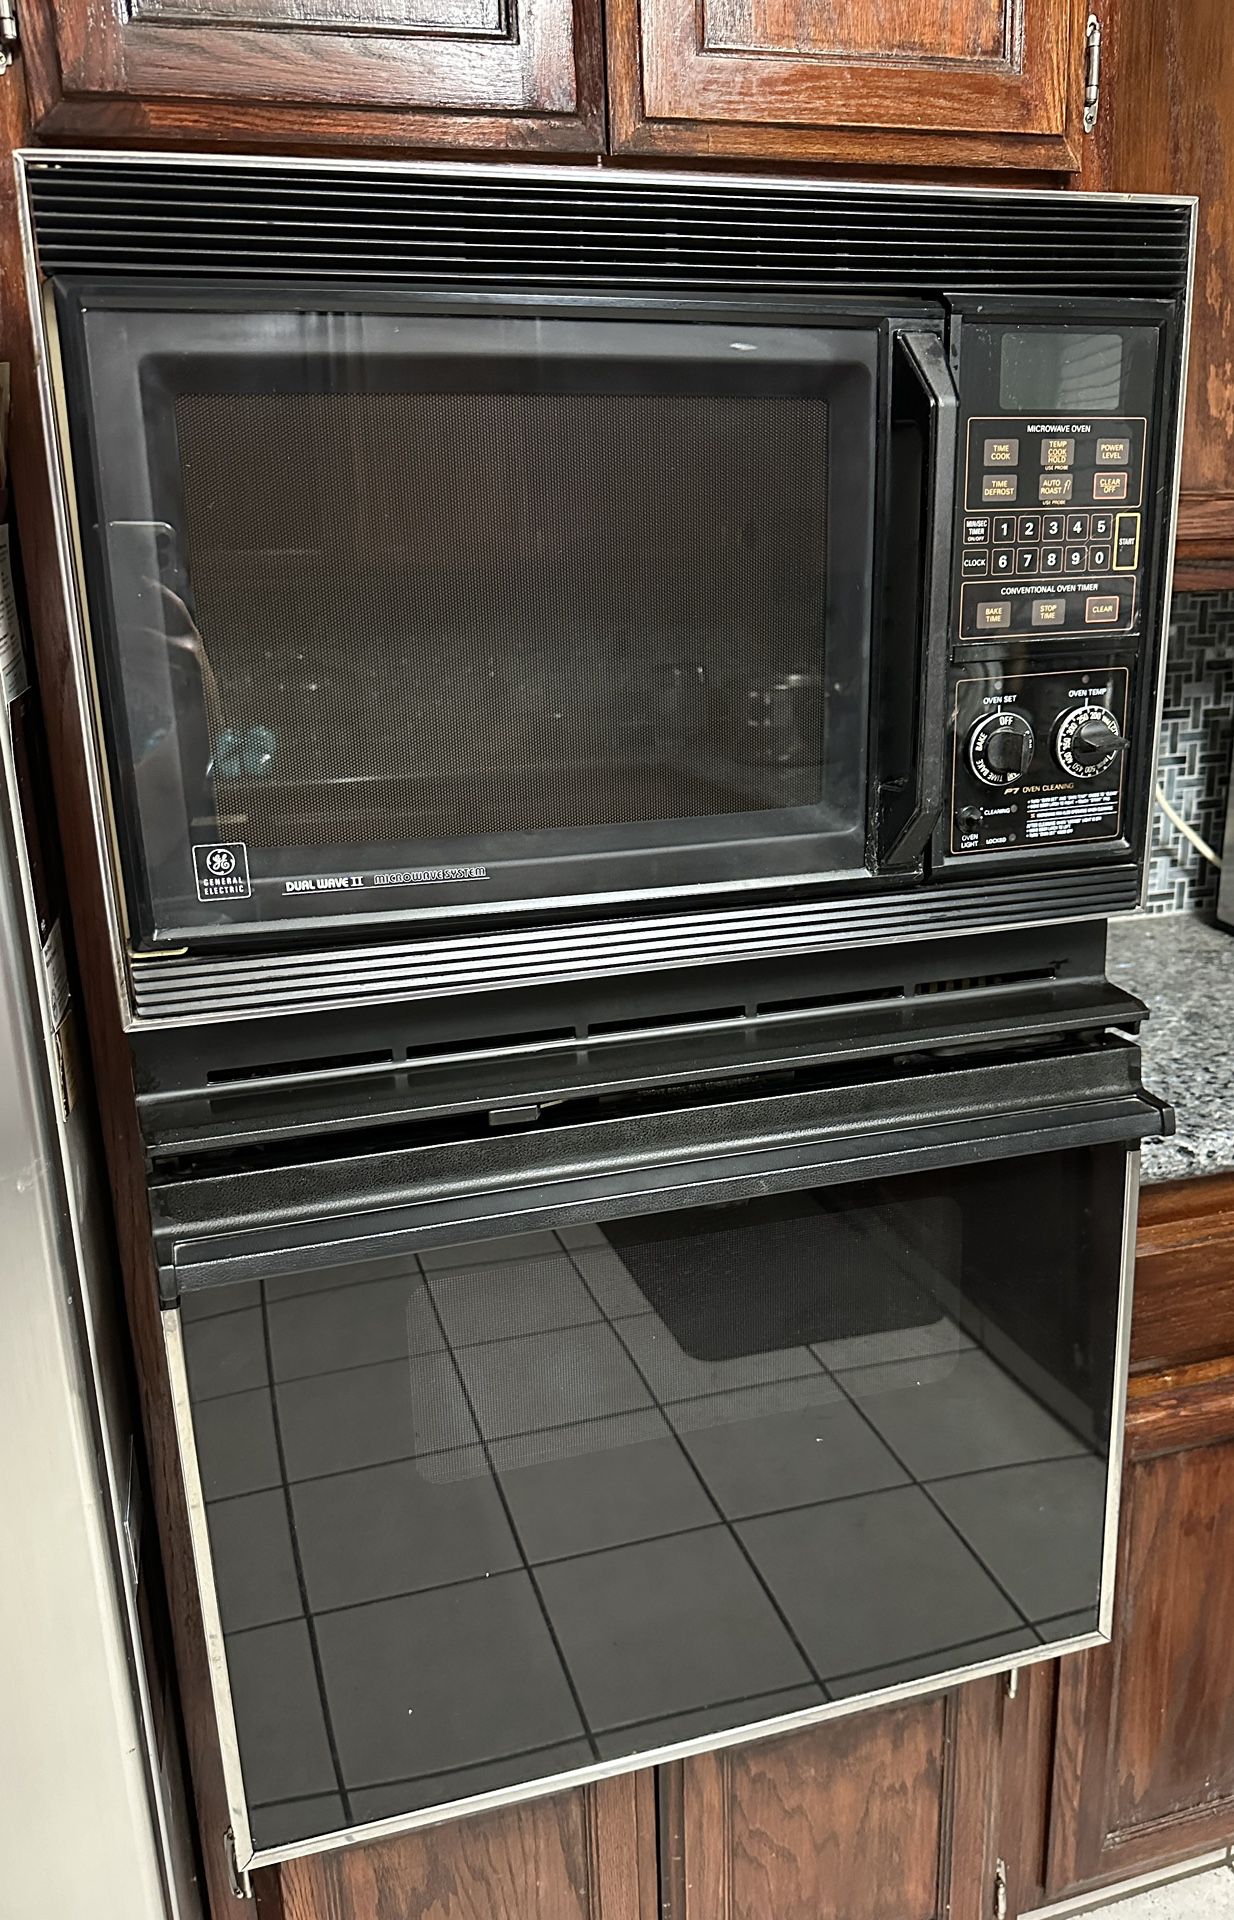 General Electric GE Microwave Oven Combo